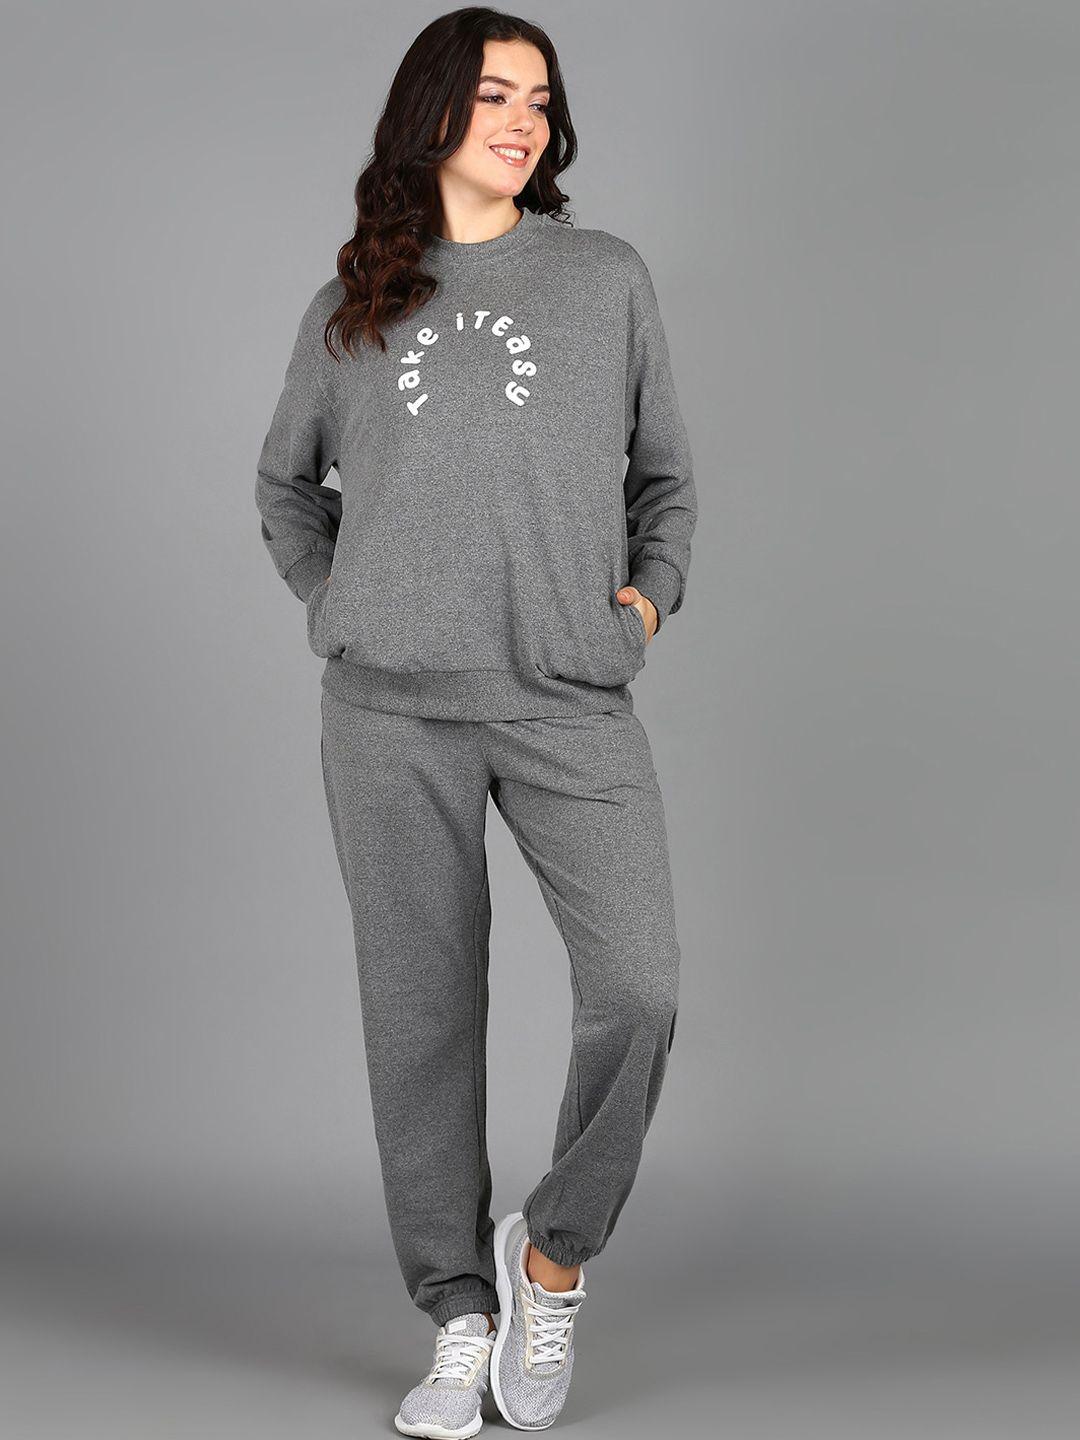 the roadster lifestyle co. grey typography printed long sleeves mid-rise tracksuit